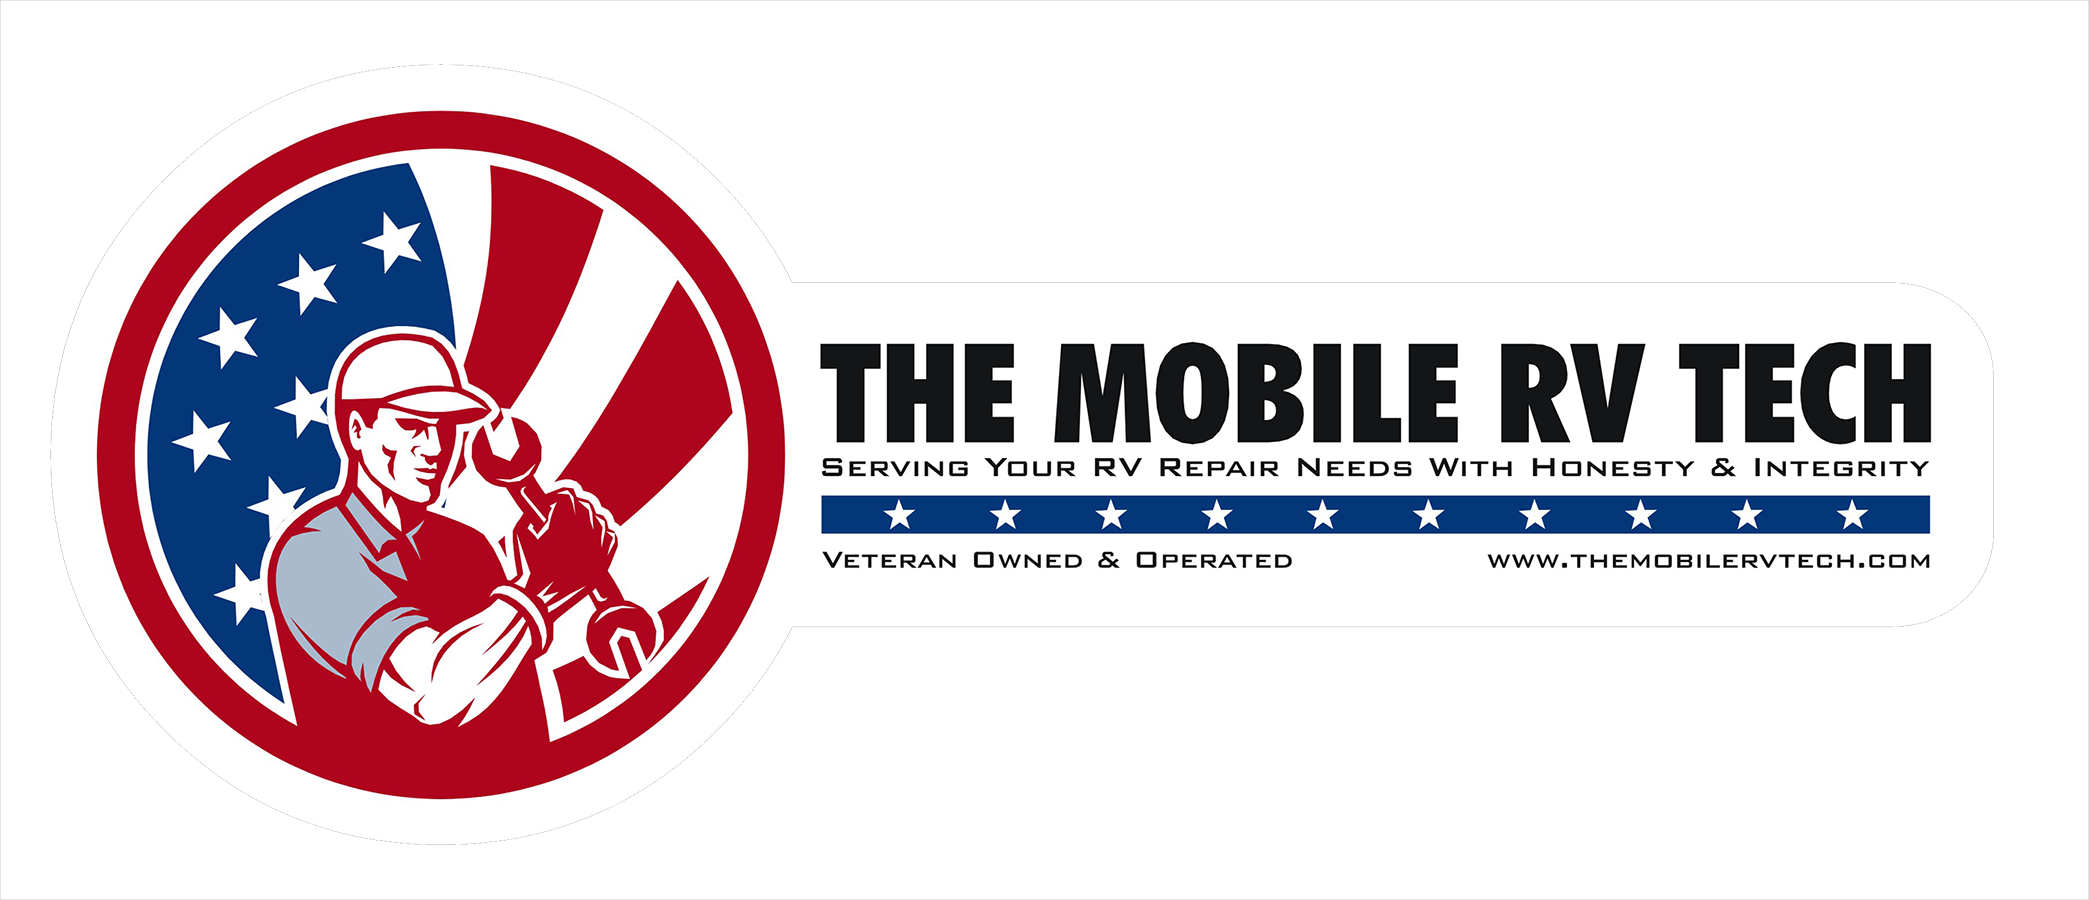 The Mobile RV Tech Online Store